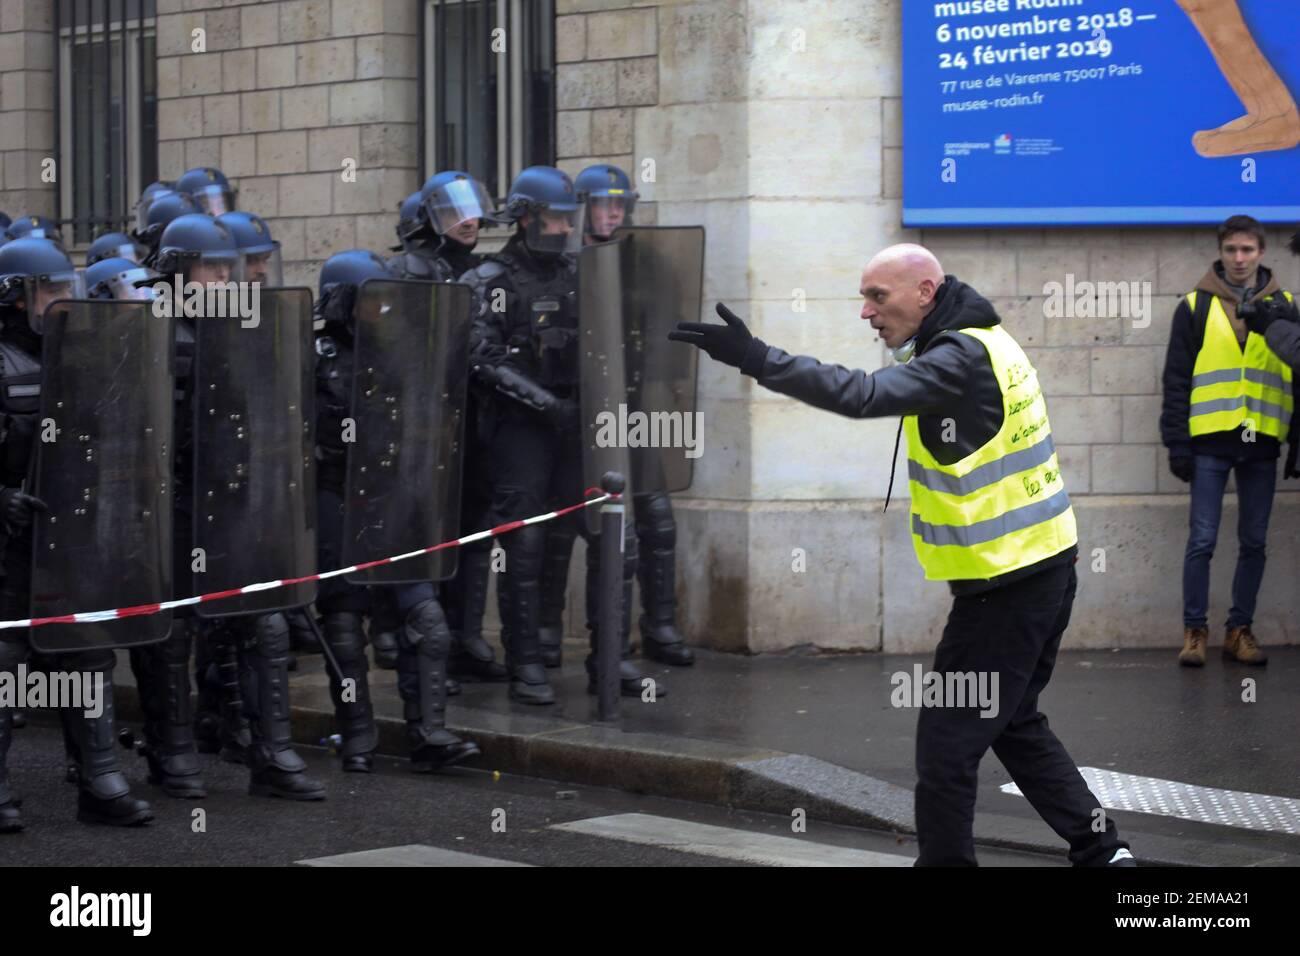 19 January 2019. Paris, France. Gilets Jaunes - Acte X take to the streets of Paris. A protester makes his feelings known to a wall of CRS riot police who have sealed a road along the route. An estimated 7,000 people took part in the looping 14 km route from Place des Invalides to protest tax hikes from the Government of Emmanuel Macron imposed on the people. An estimated 80,000 people took part in protests across the country. Regrettably the movement has attracted a violent element of agitators who often face off with riot police at the end of the marches which tends to deflect attention awa Stock Photo